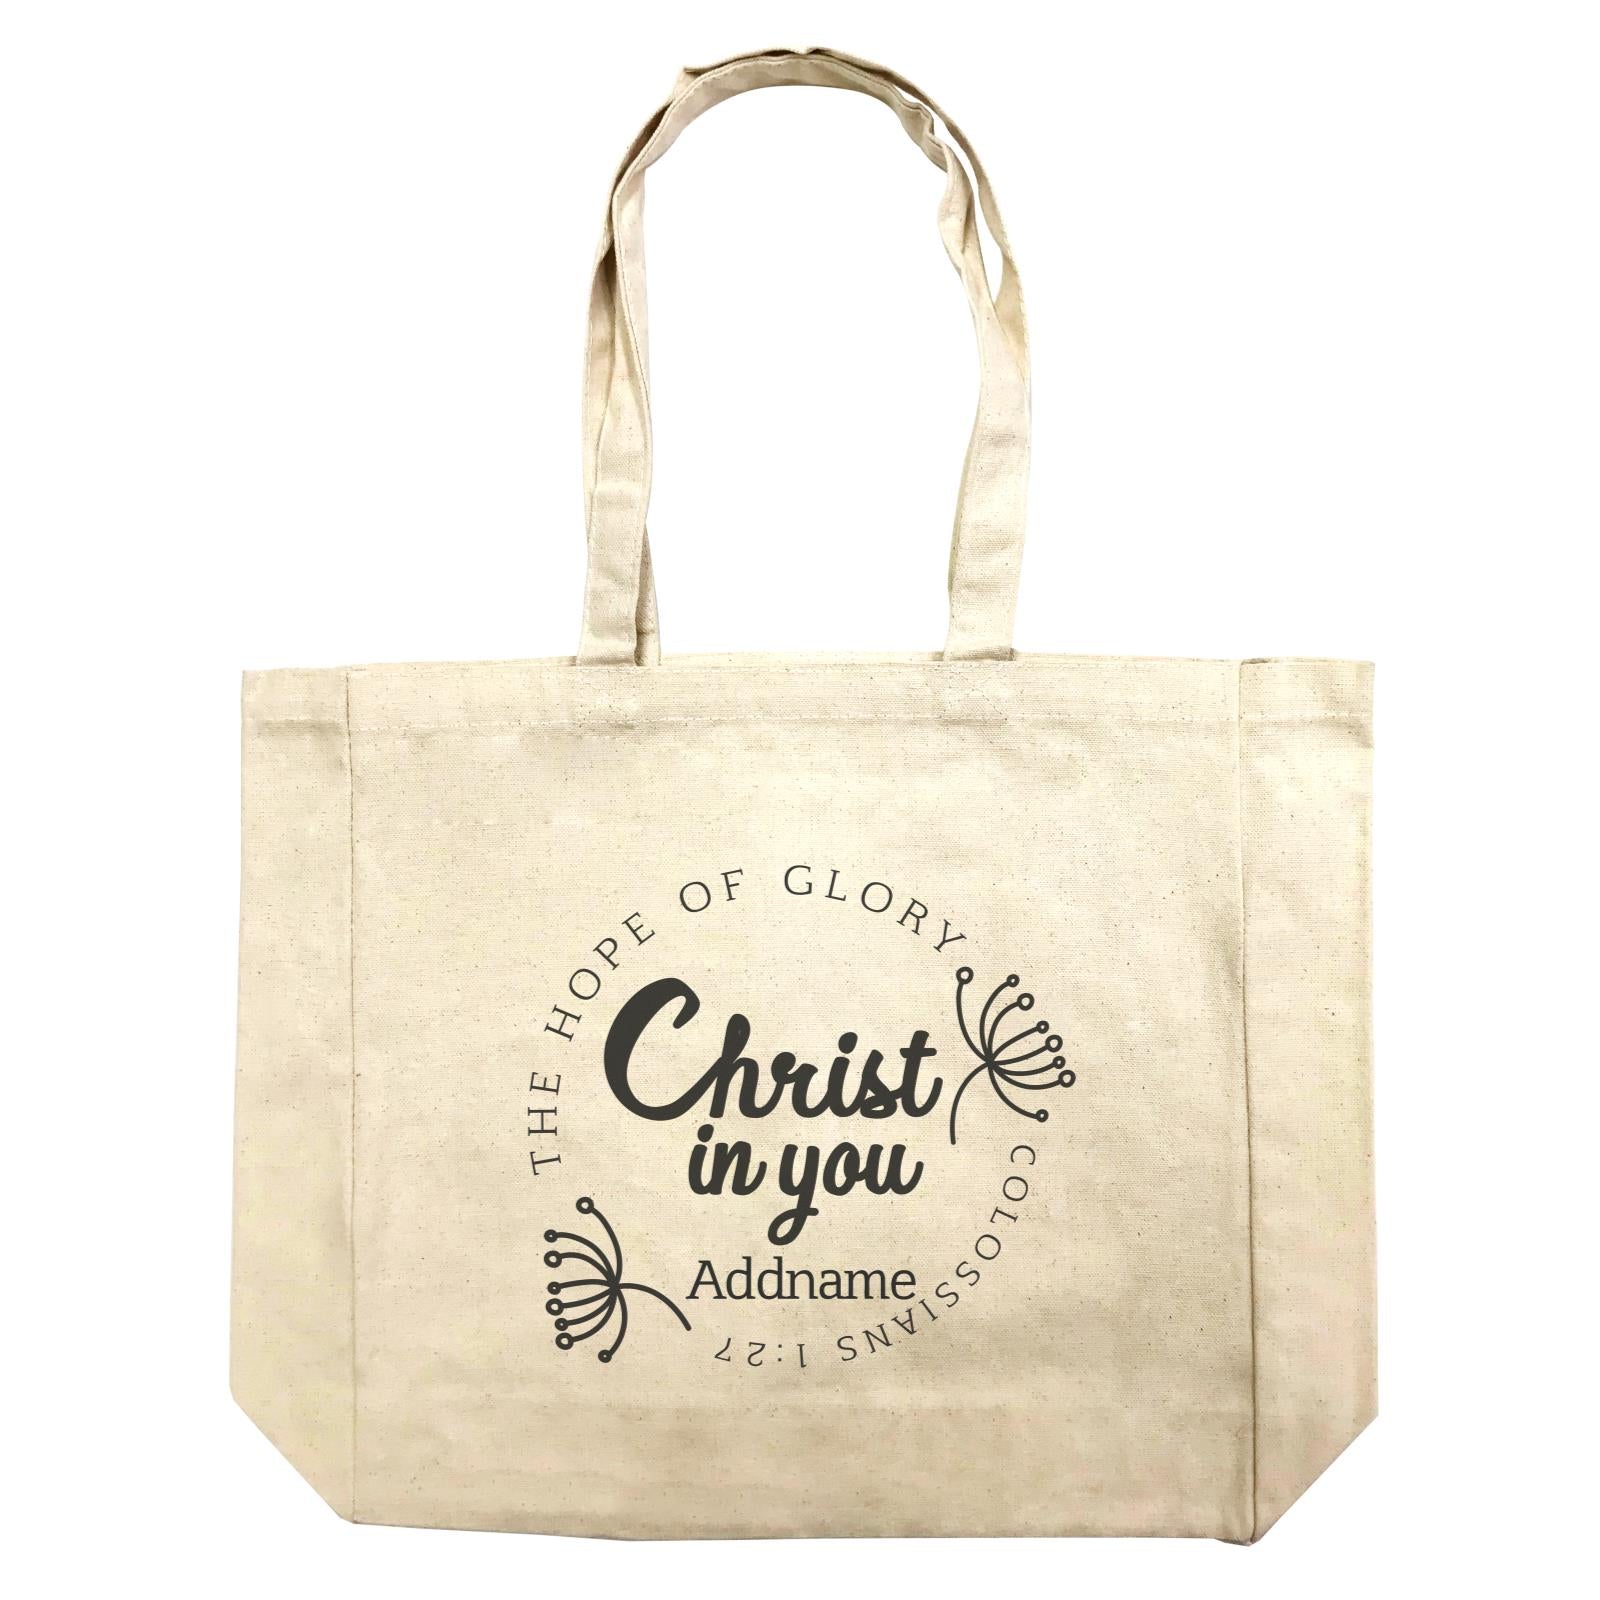 Christian Series The Hope Of Glory Christ In You Colossians 1.27 Addname Shopping Bag